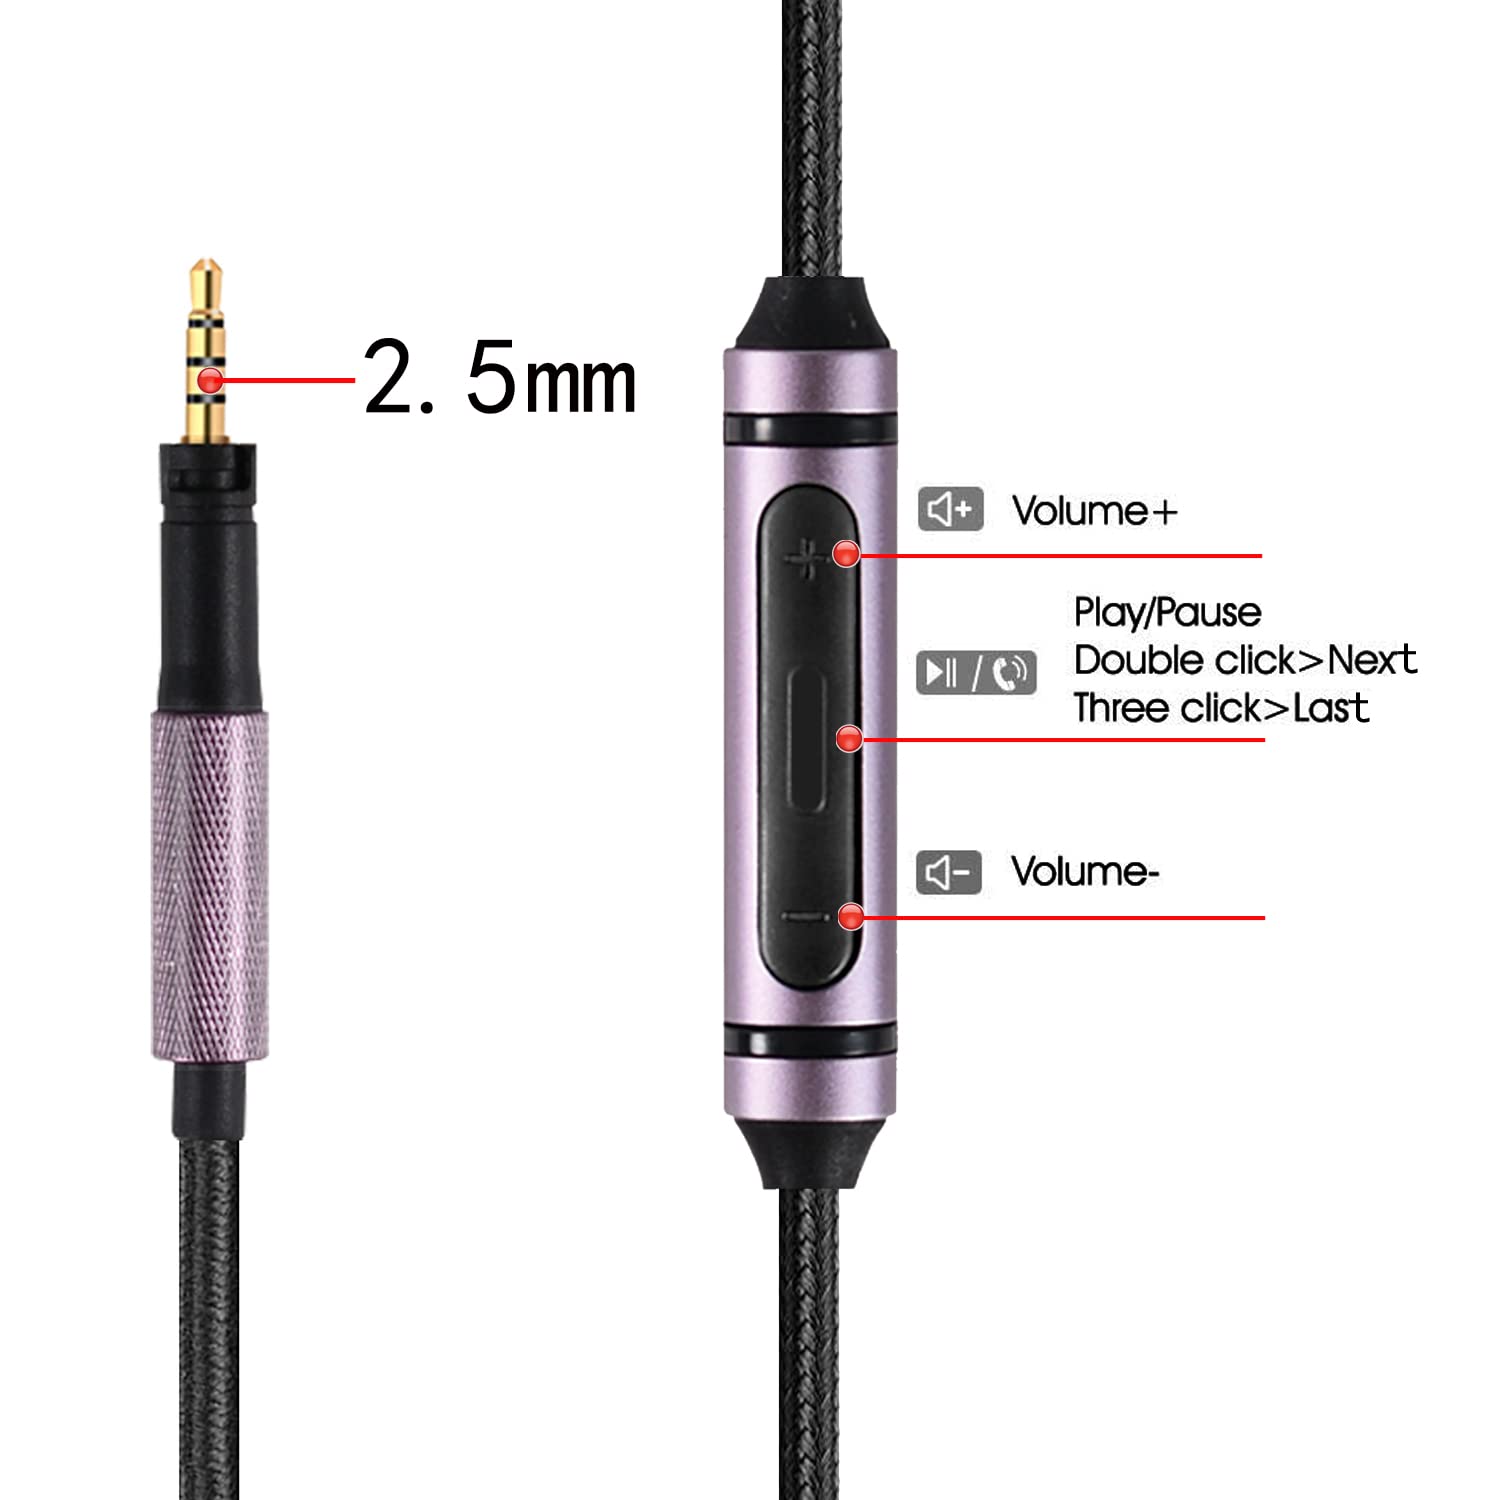 FAAEAL Replacement Upgrade Cable for Sennheiser Momentum 2.0/1.0, HD1,HD 4.50 SE, HD 450BT, HD 4.40, HD 4.30G Headphones,in-line Mic Control Headphone Cord Works on iOS/Android 4.9ft(with mic)